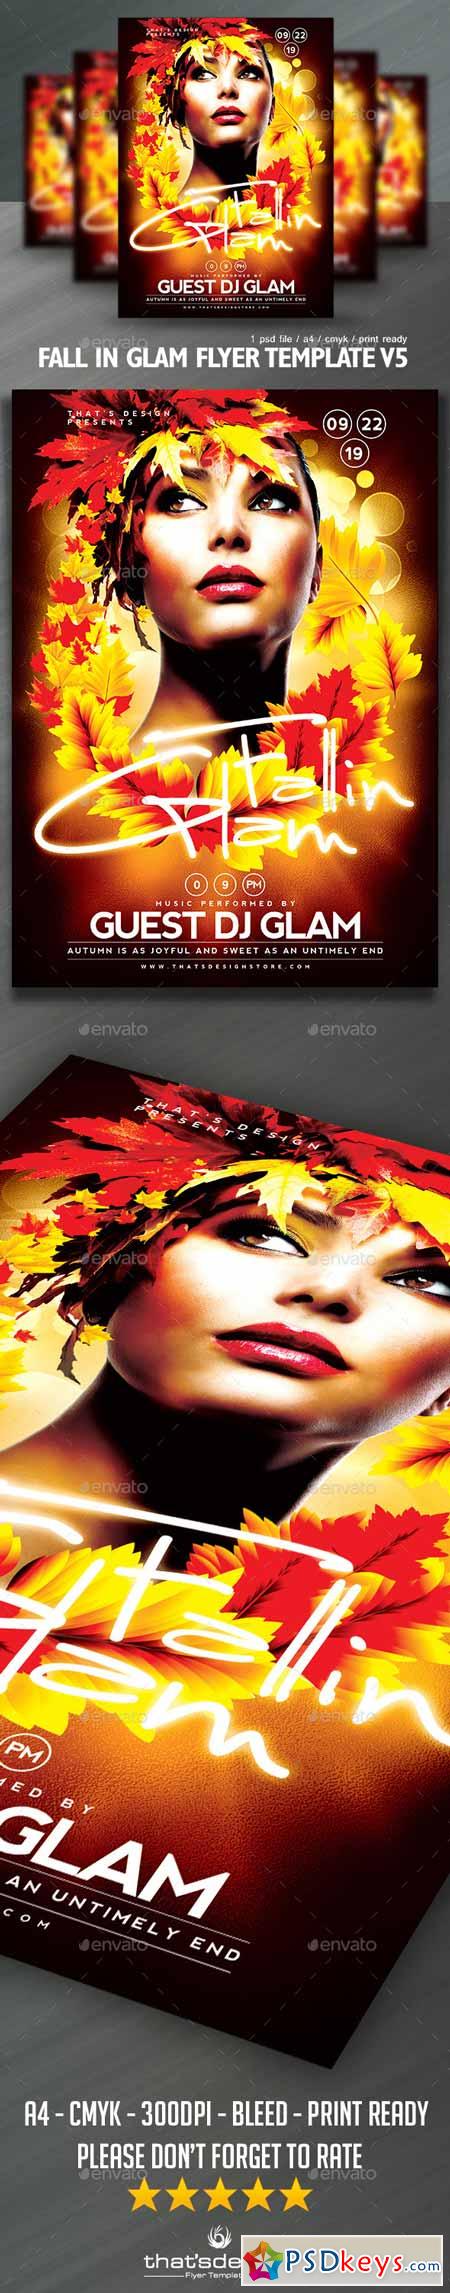 Fall in Glam Flyer Template V5 12991766